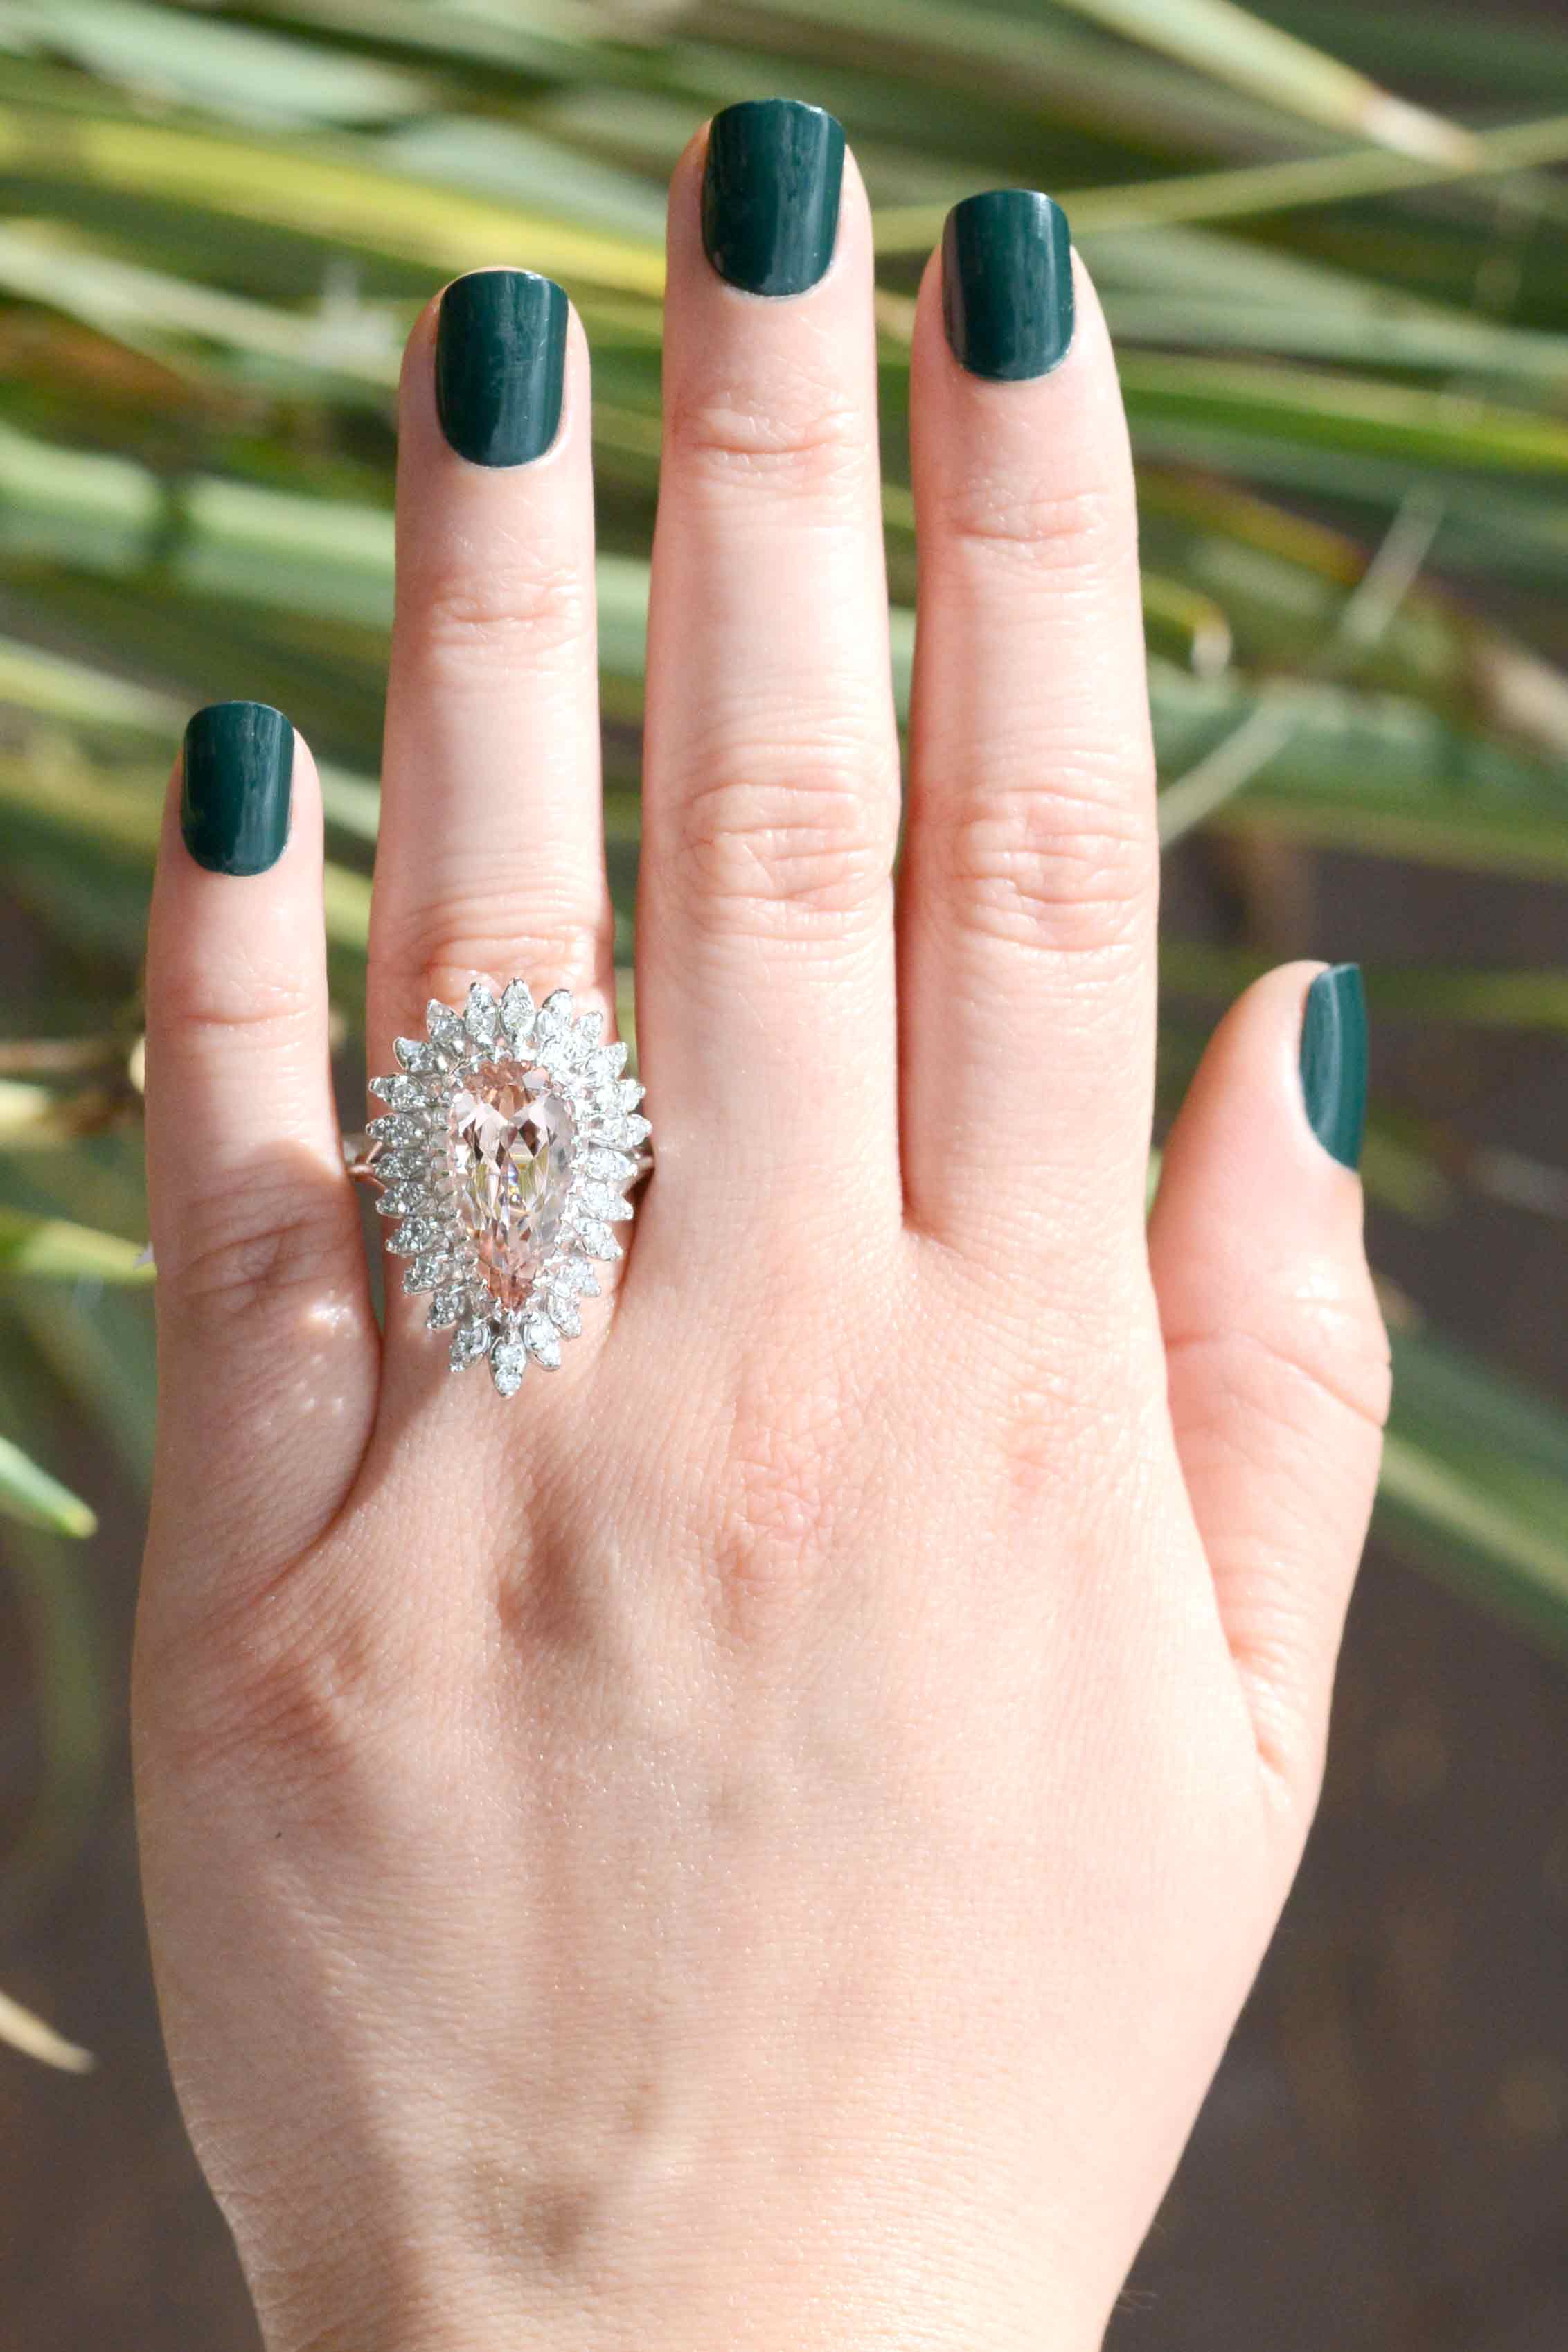 Hollywood glam at its best, this morganite ring is made from 14k white gold.